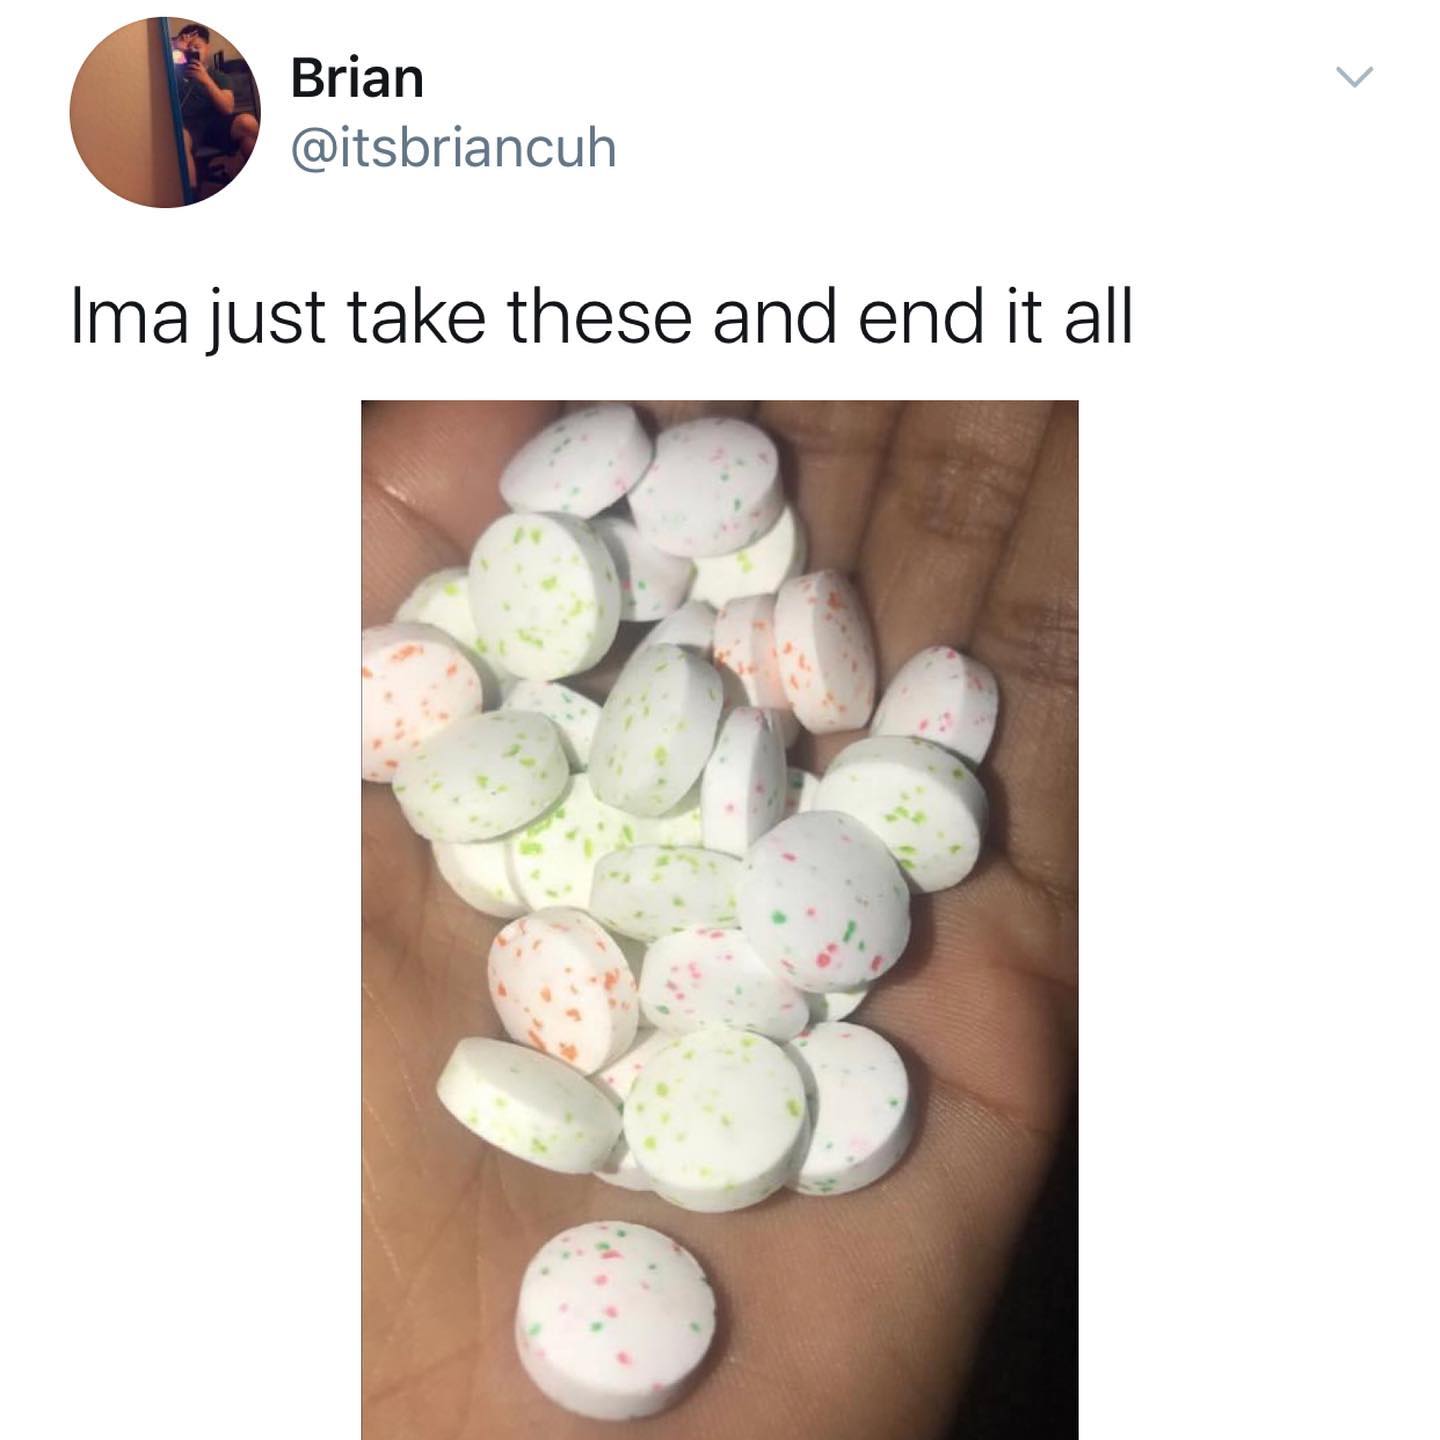 dank memes - twitter - plastic - v Brian Ima just take these and end it all